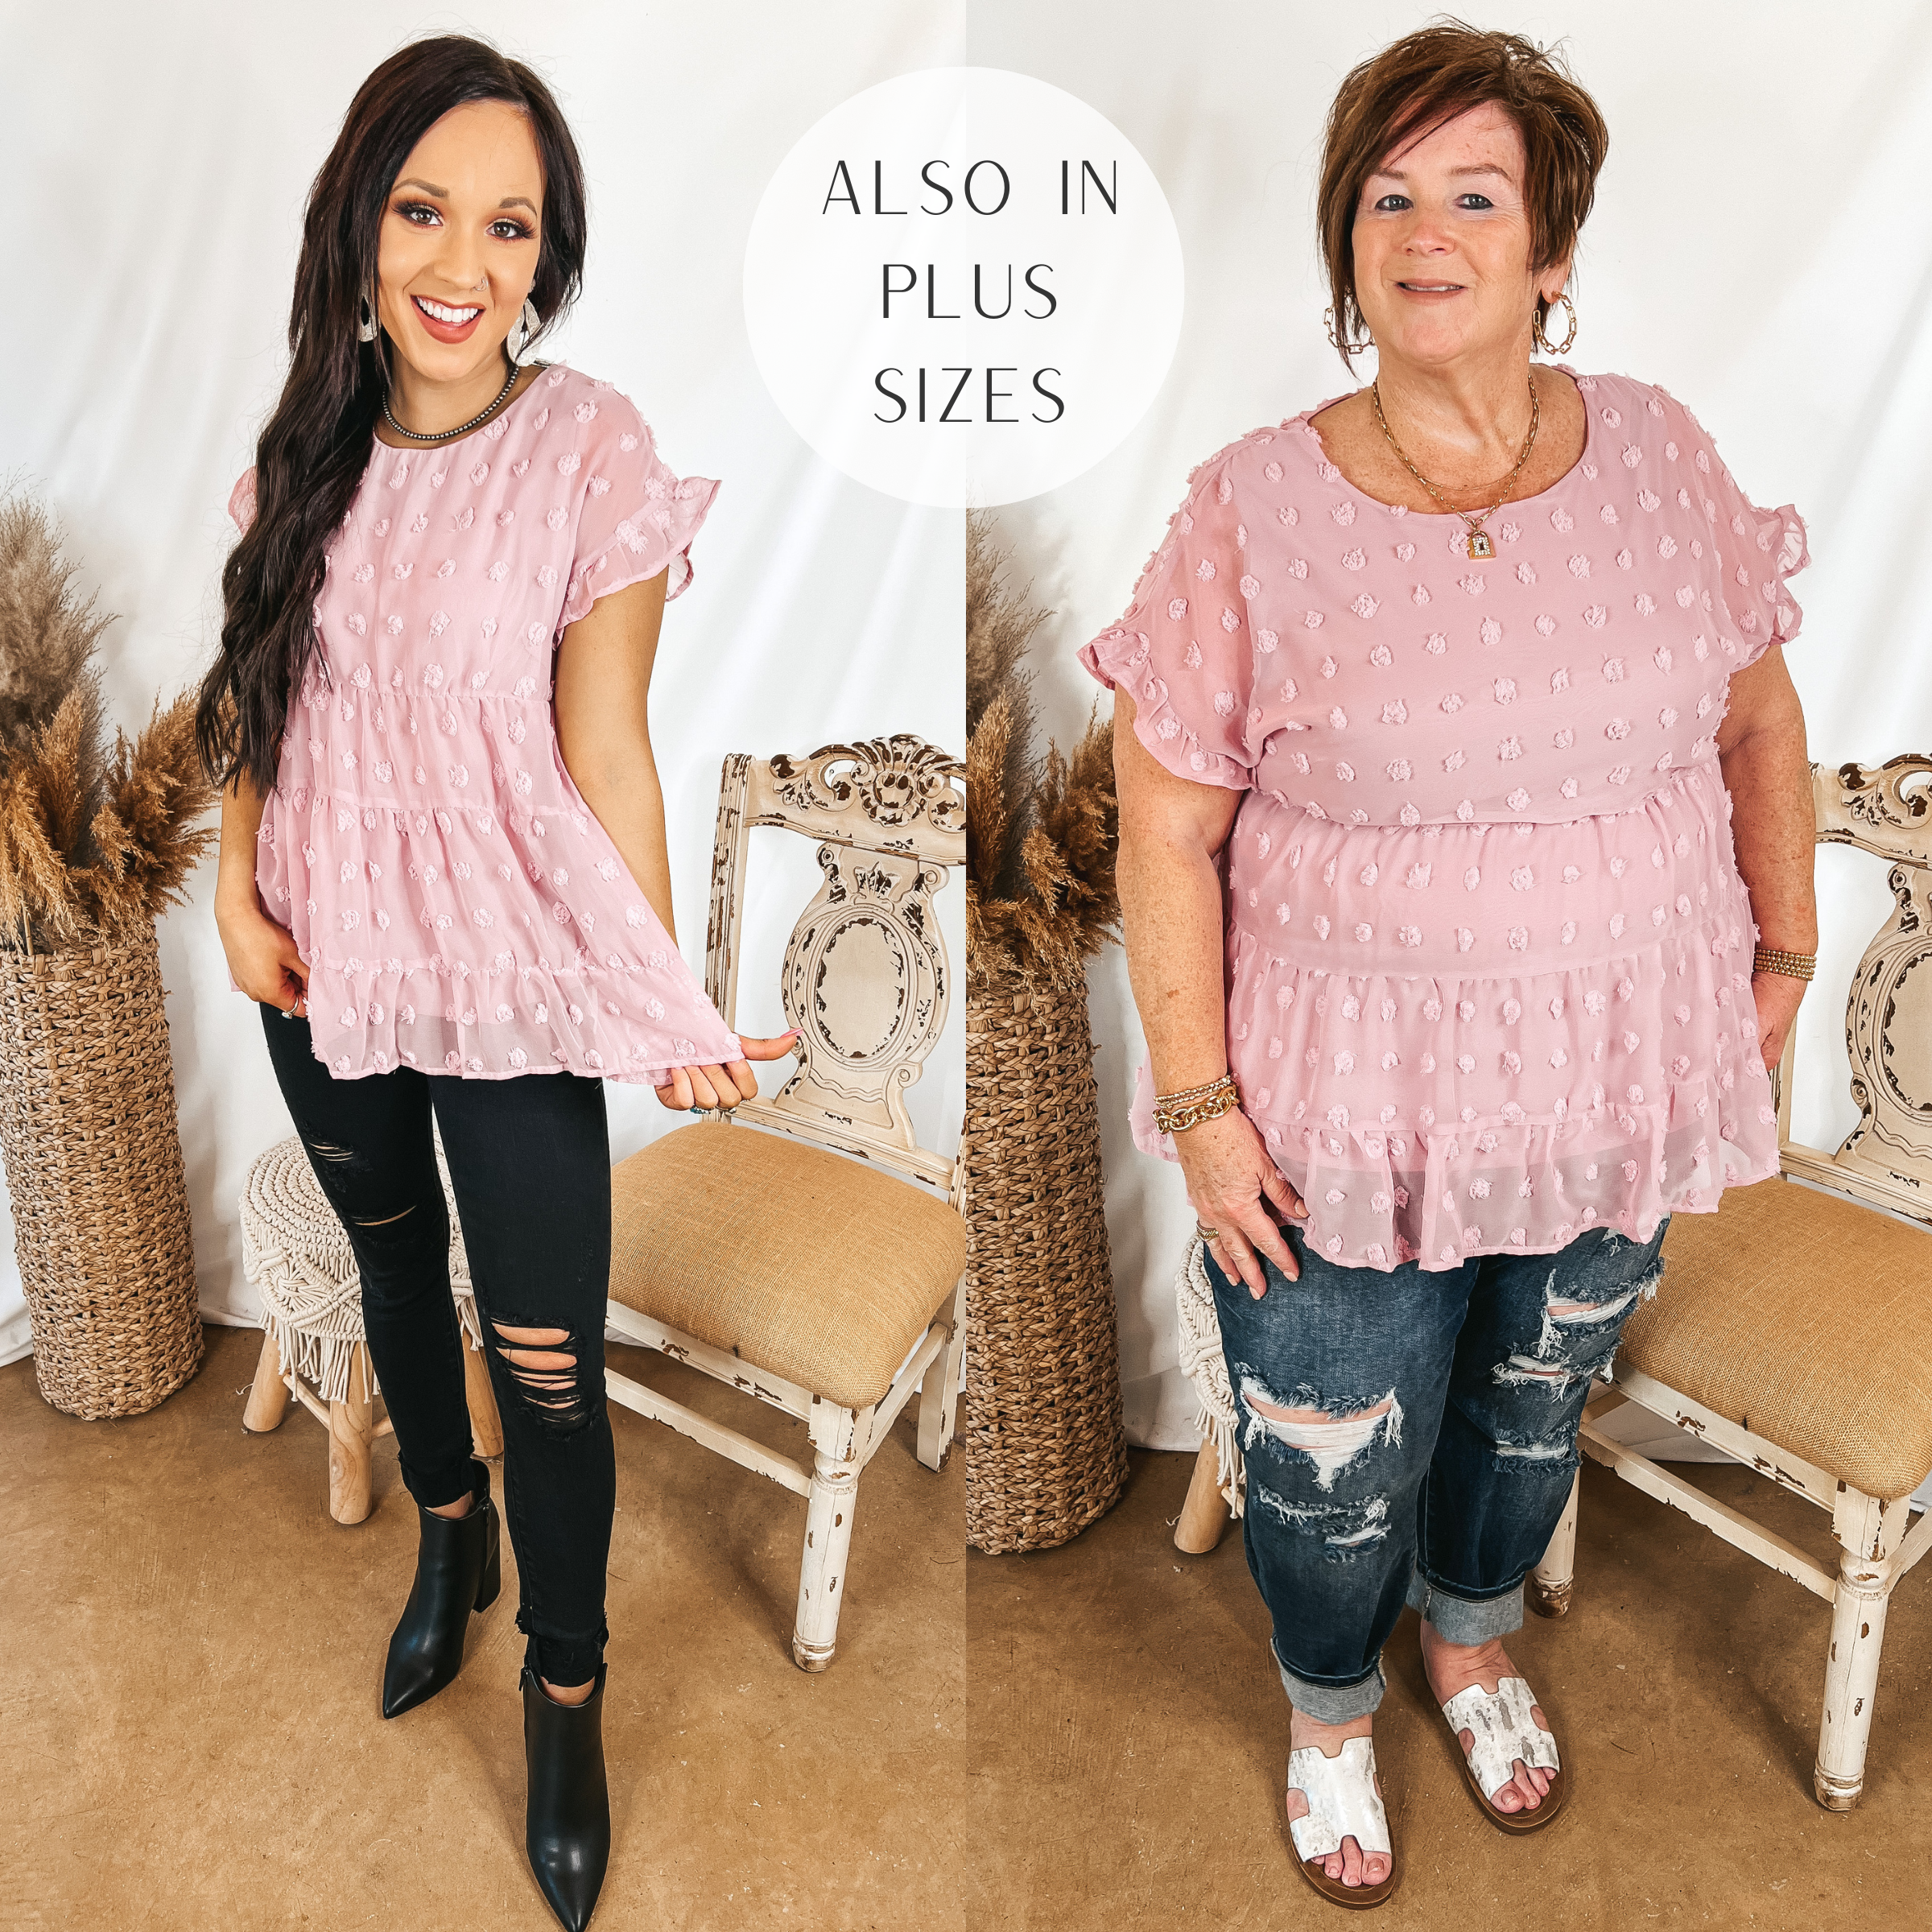 Models are wearing a mauve swiss dot babydoll top. Size small model has it paired with black distressed jeans, black booties, and silver jewelry. Plus size model has it paired with dark wash boyfriend jeans white sandals, and gold jewelry.